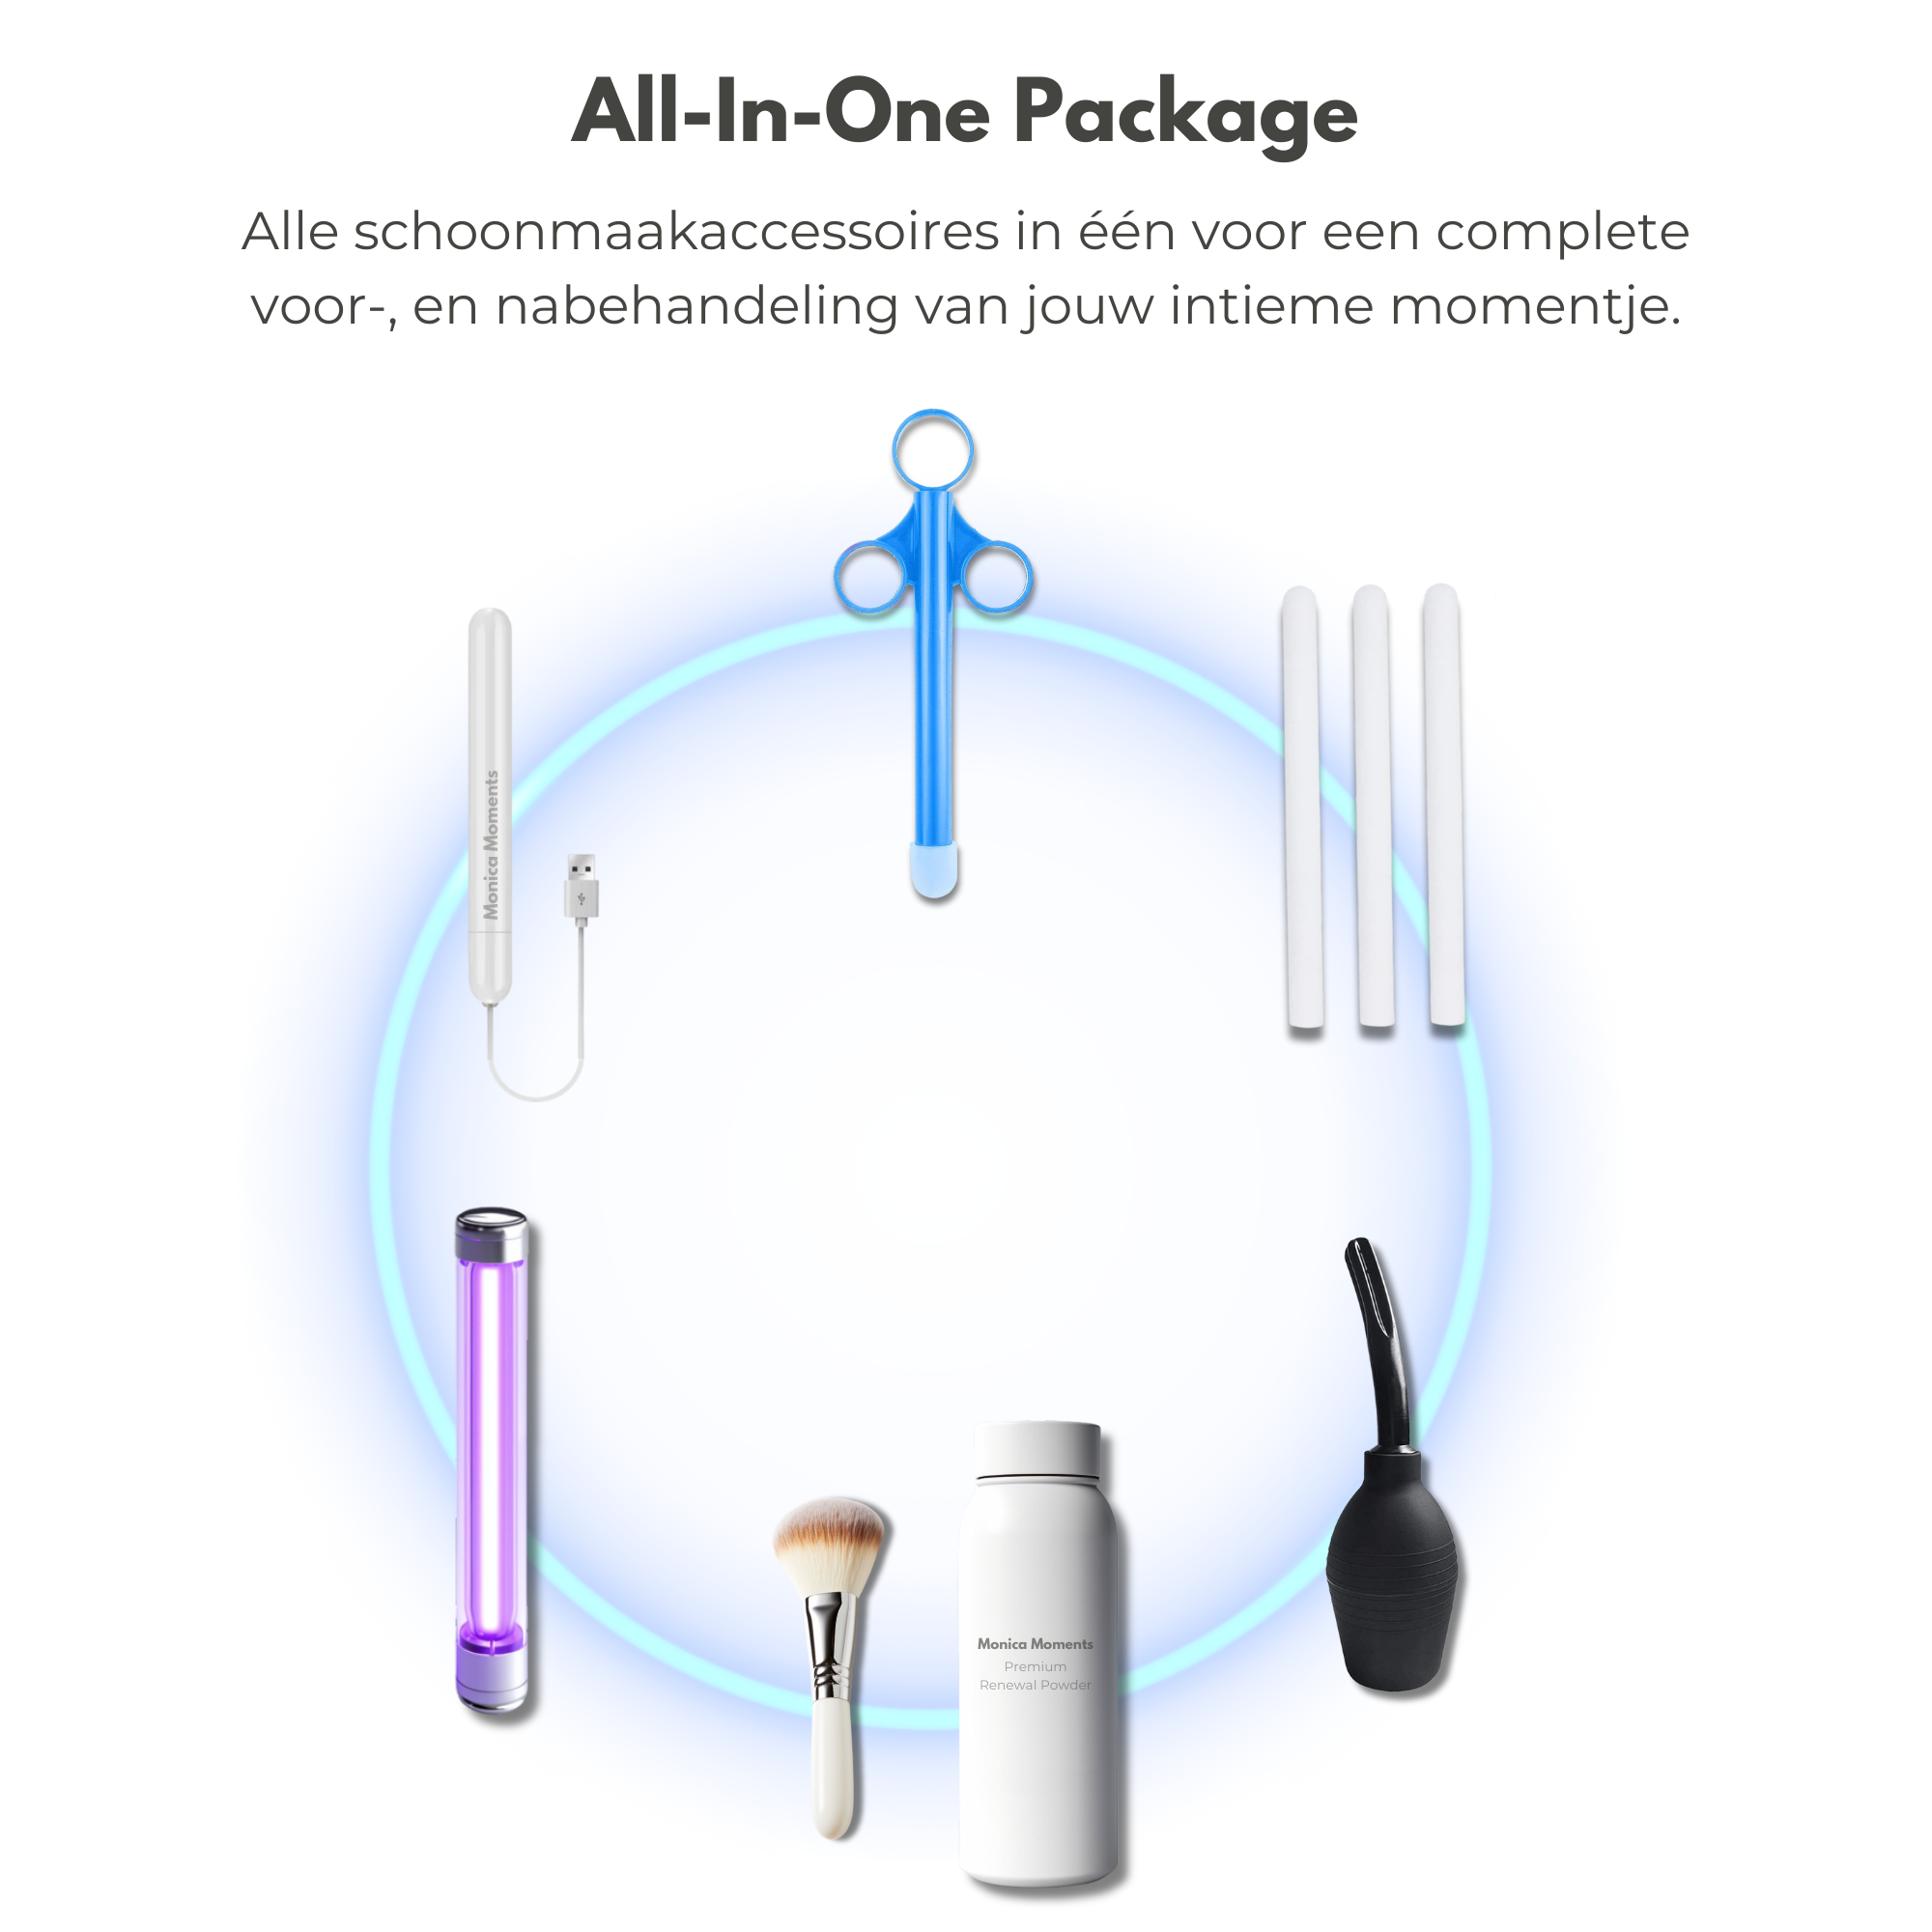 All-In-One Package